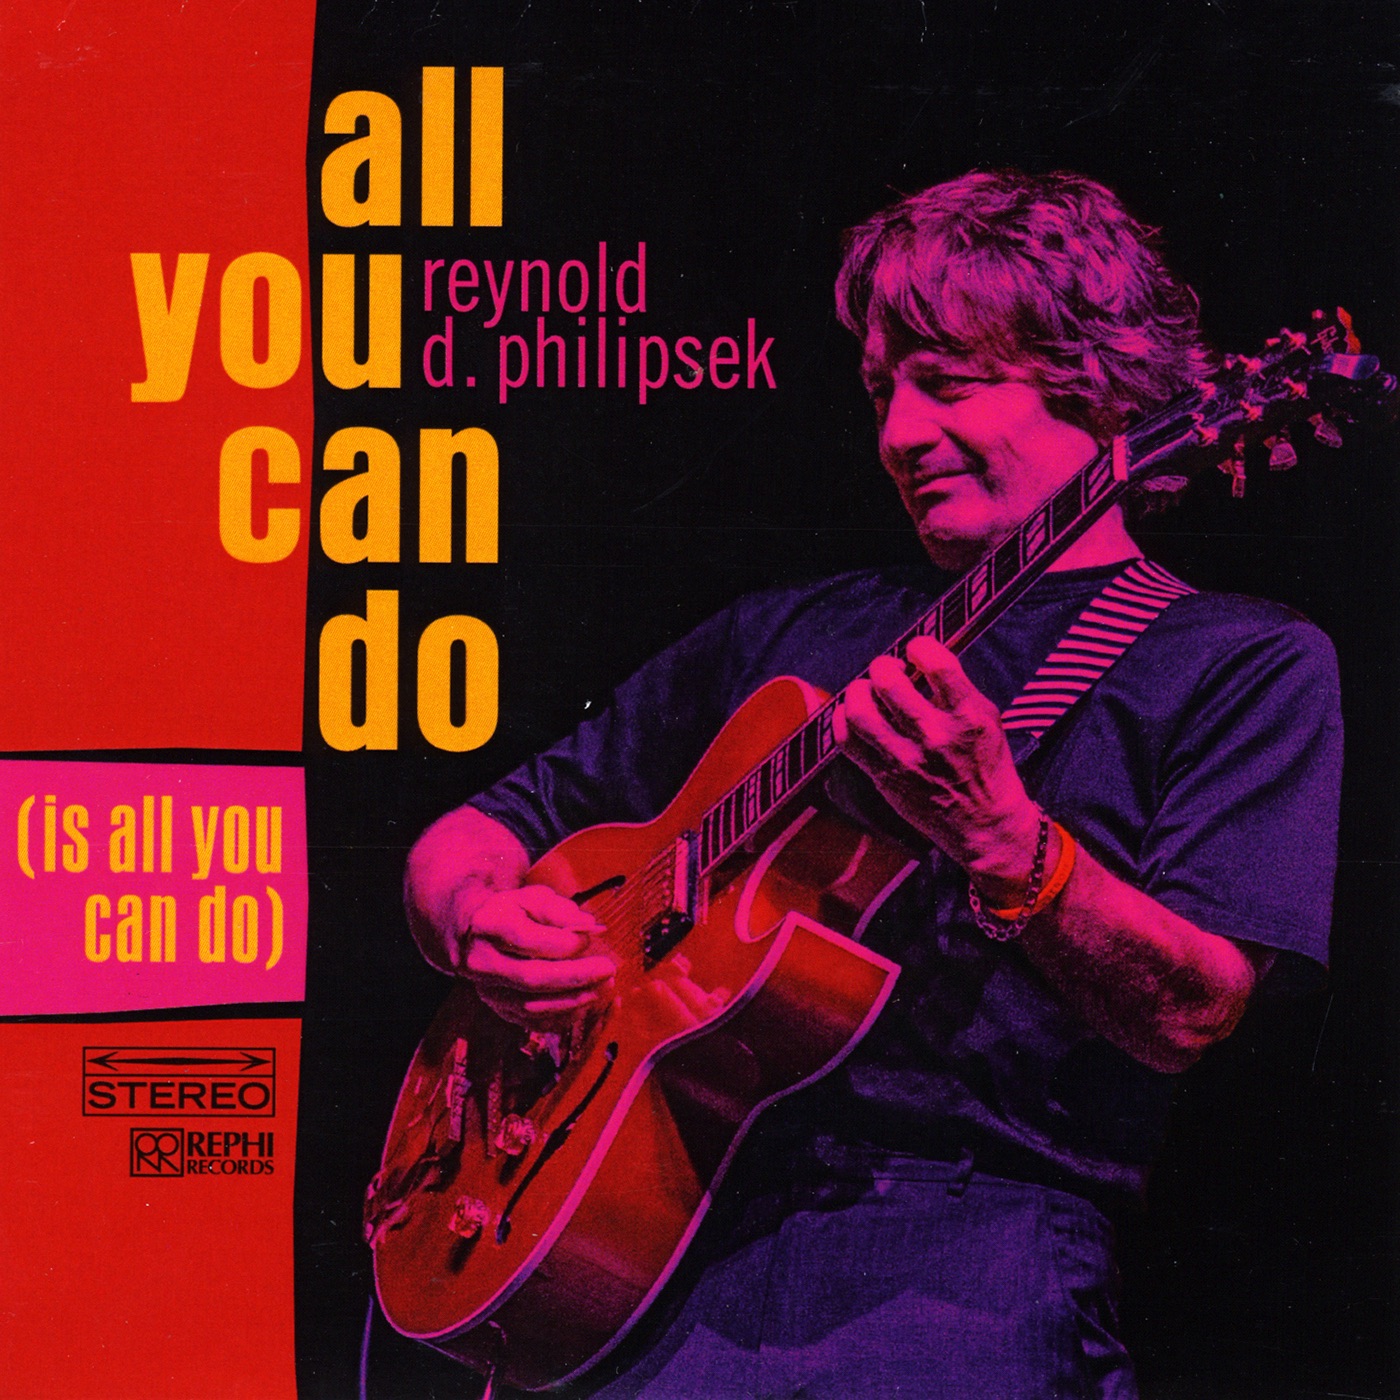 All You Can Do (Is All You Can Do)